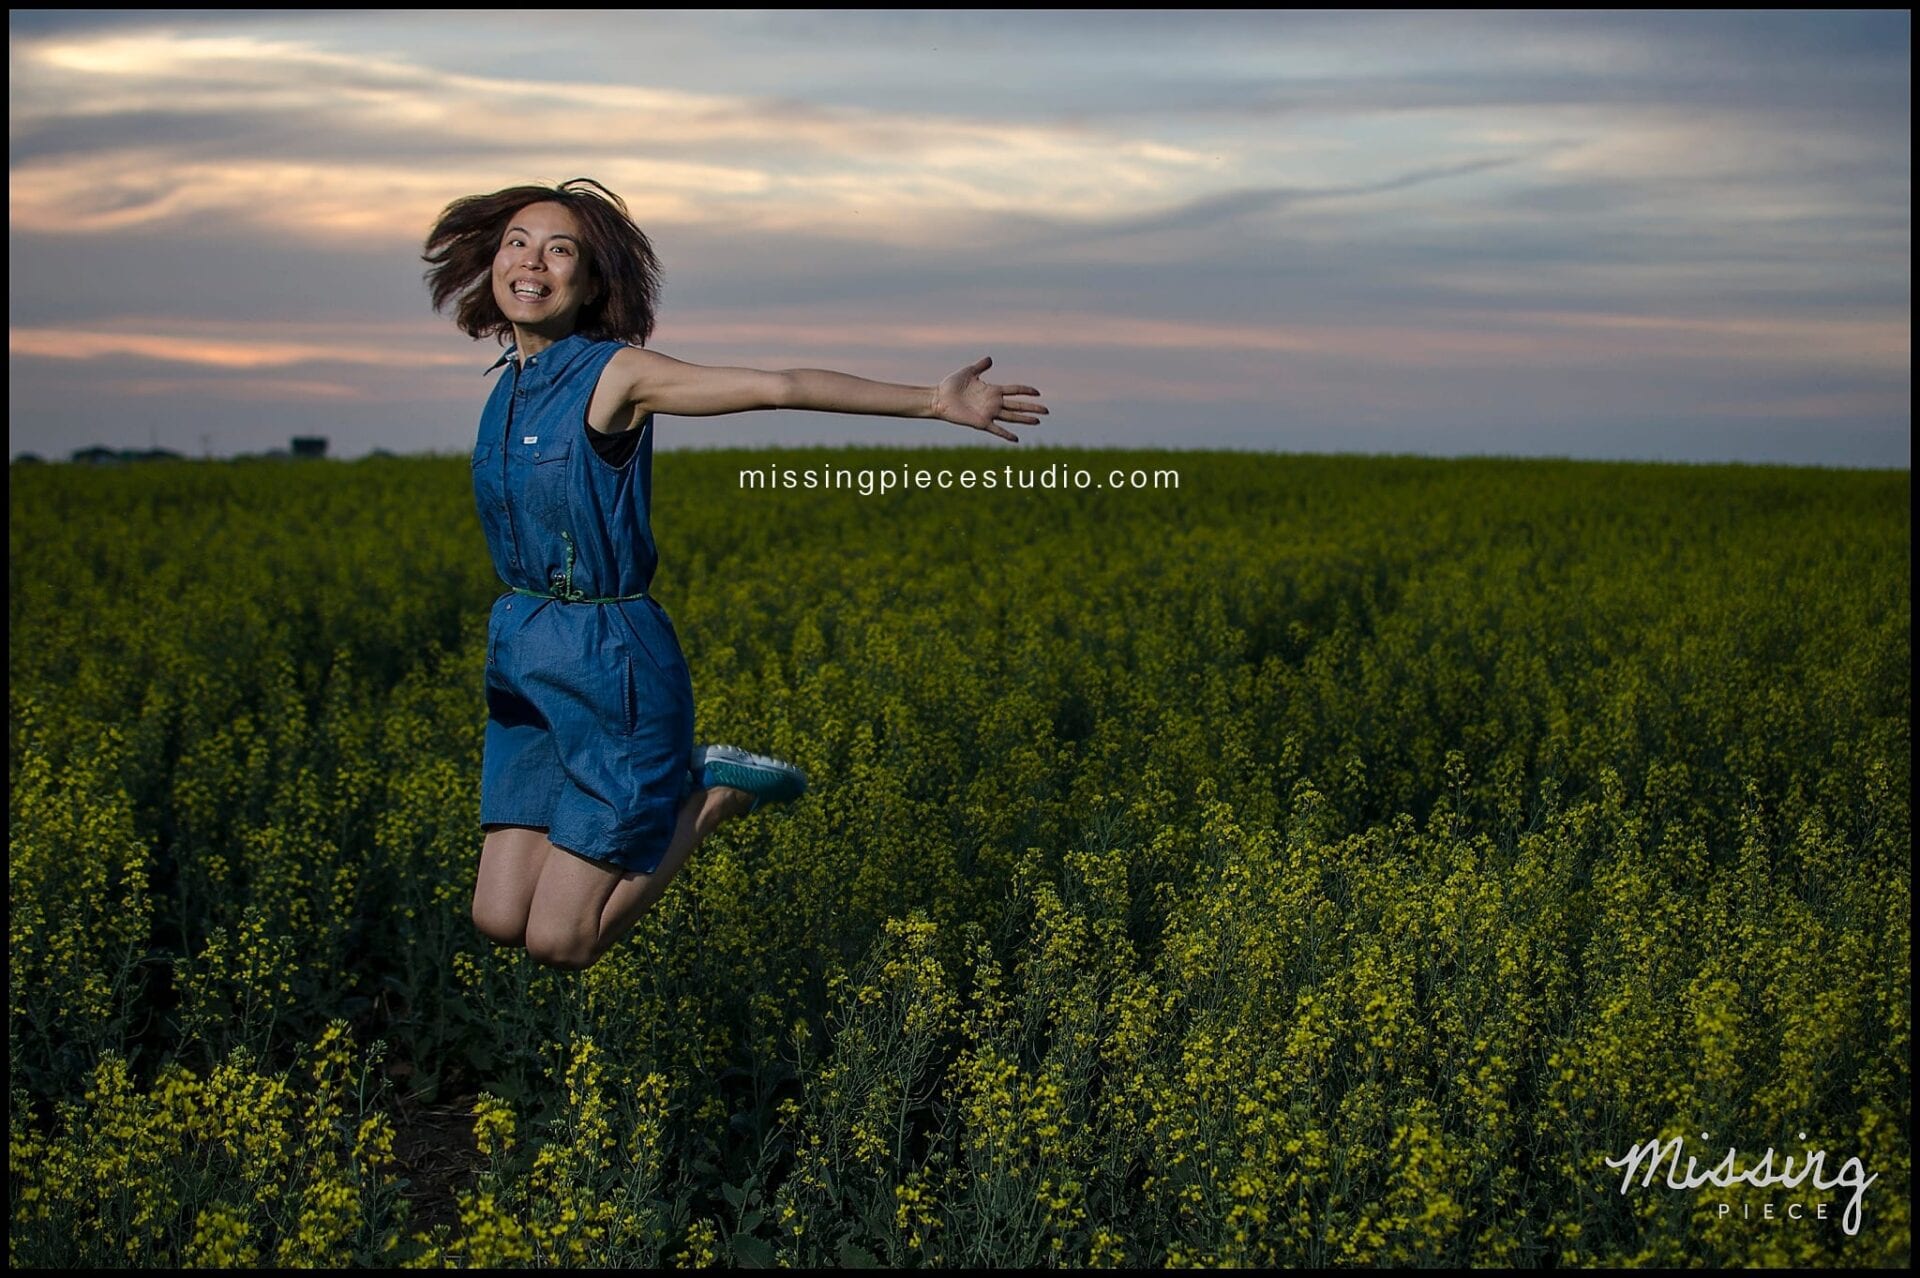 A girl jumping with joy in a beautiful canola field during sunset.